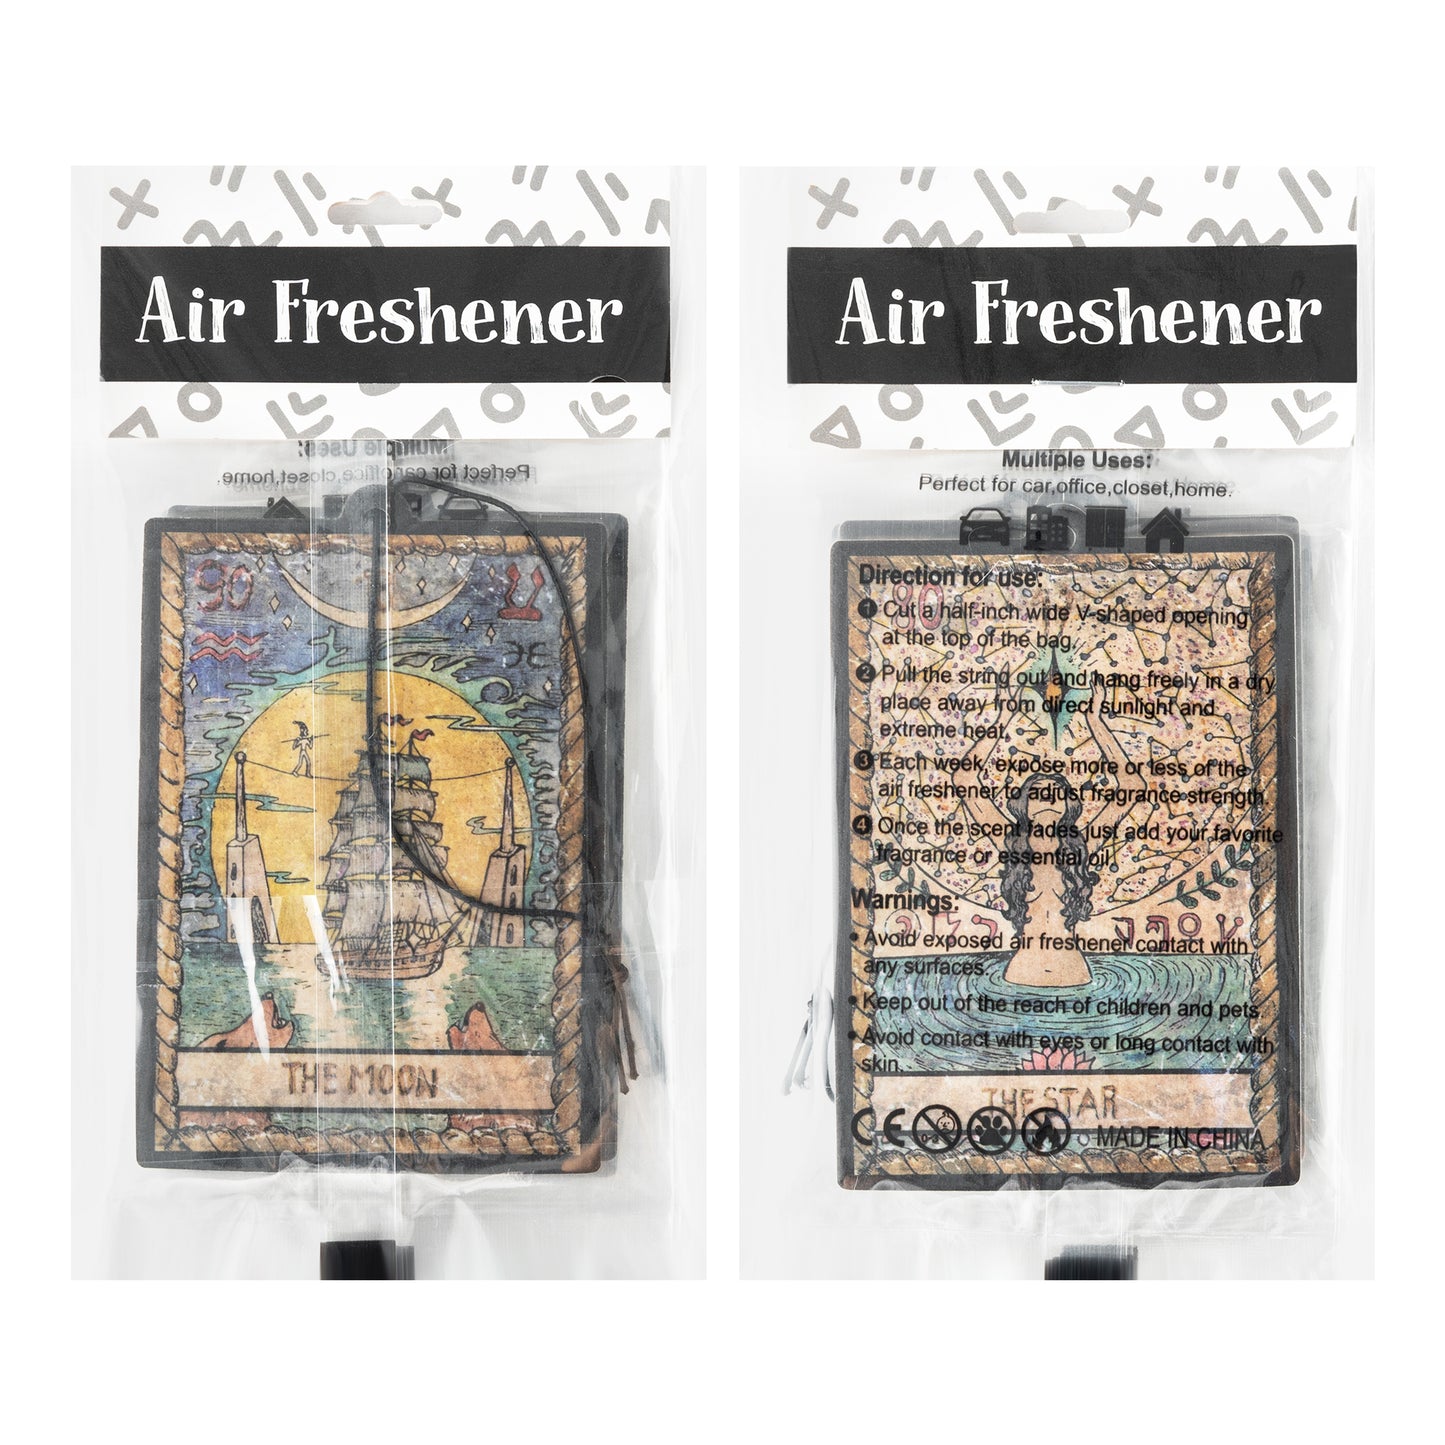 4Pcs Vintage Tarot Car Air Fresheners, The Star World Sun Moon Hanging Air Freshener Fragrance Scented Cards, Old Style Tarot Theme Car Aromatherapy Tablets for Car, Bedroom, Wardrobe, Shoe Cabinet